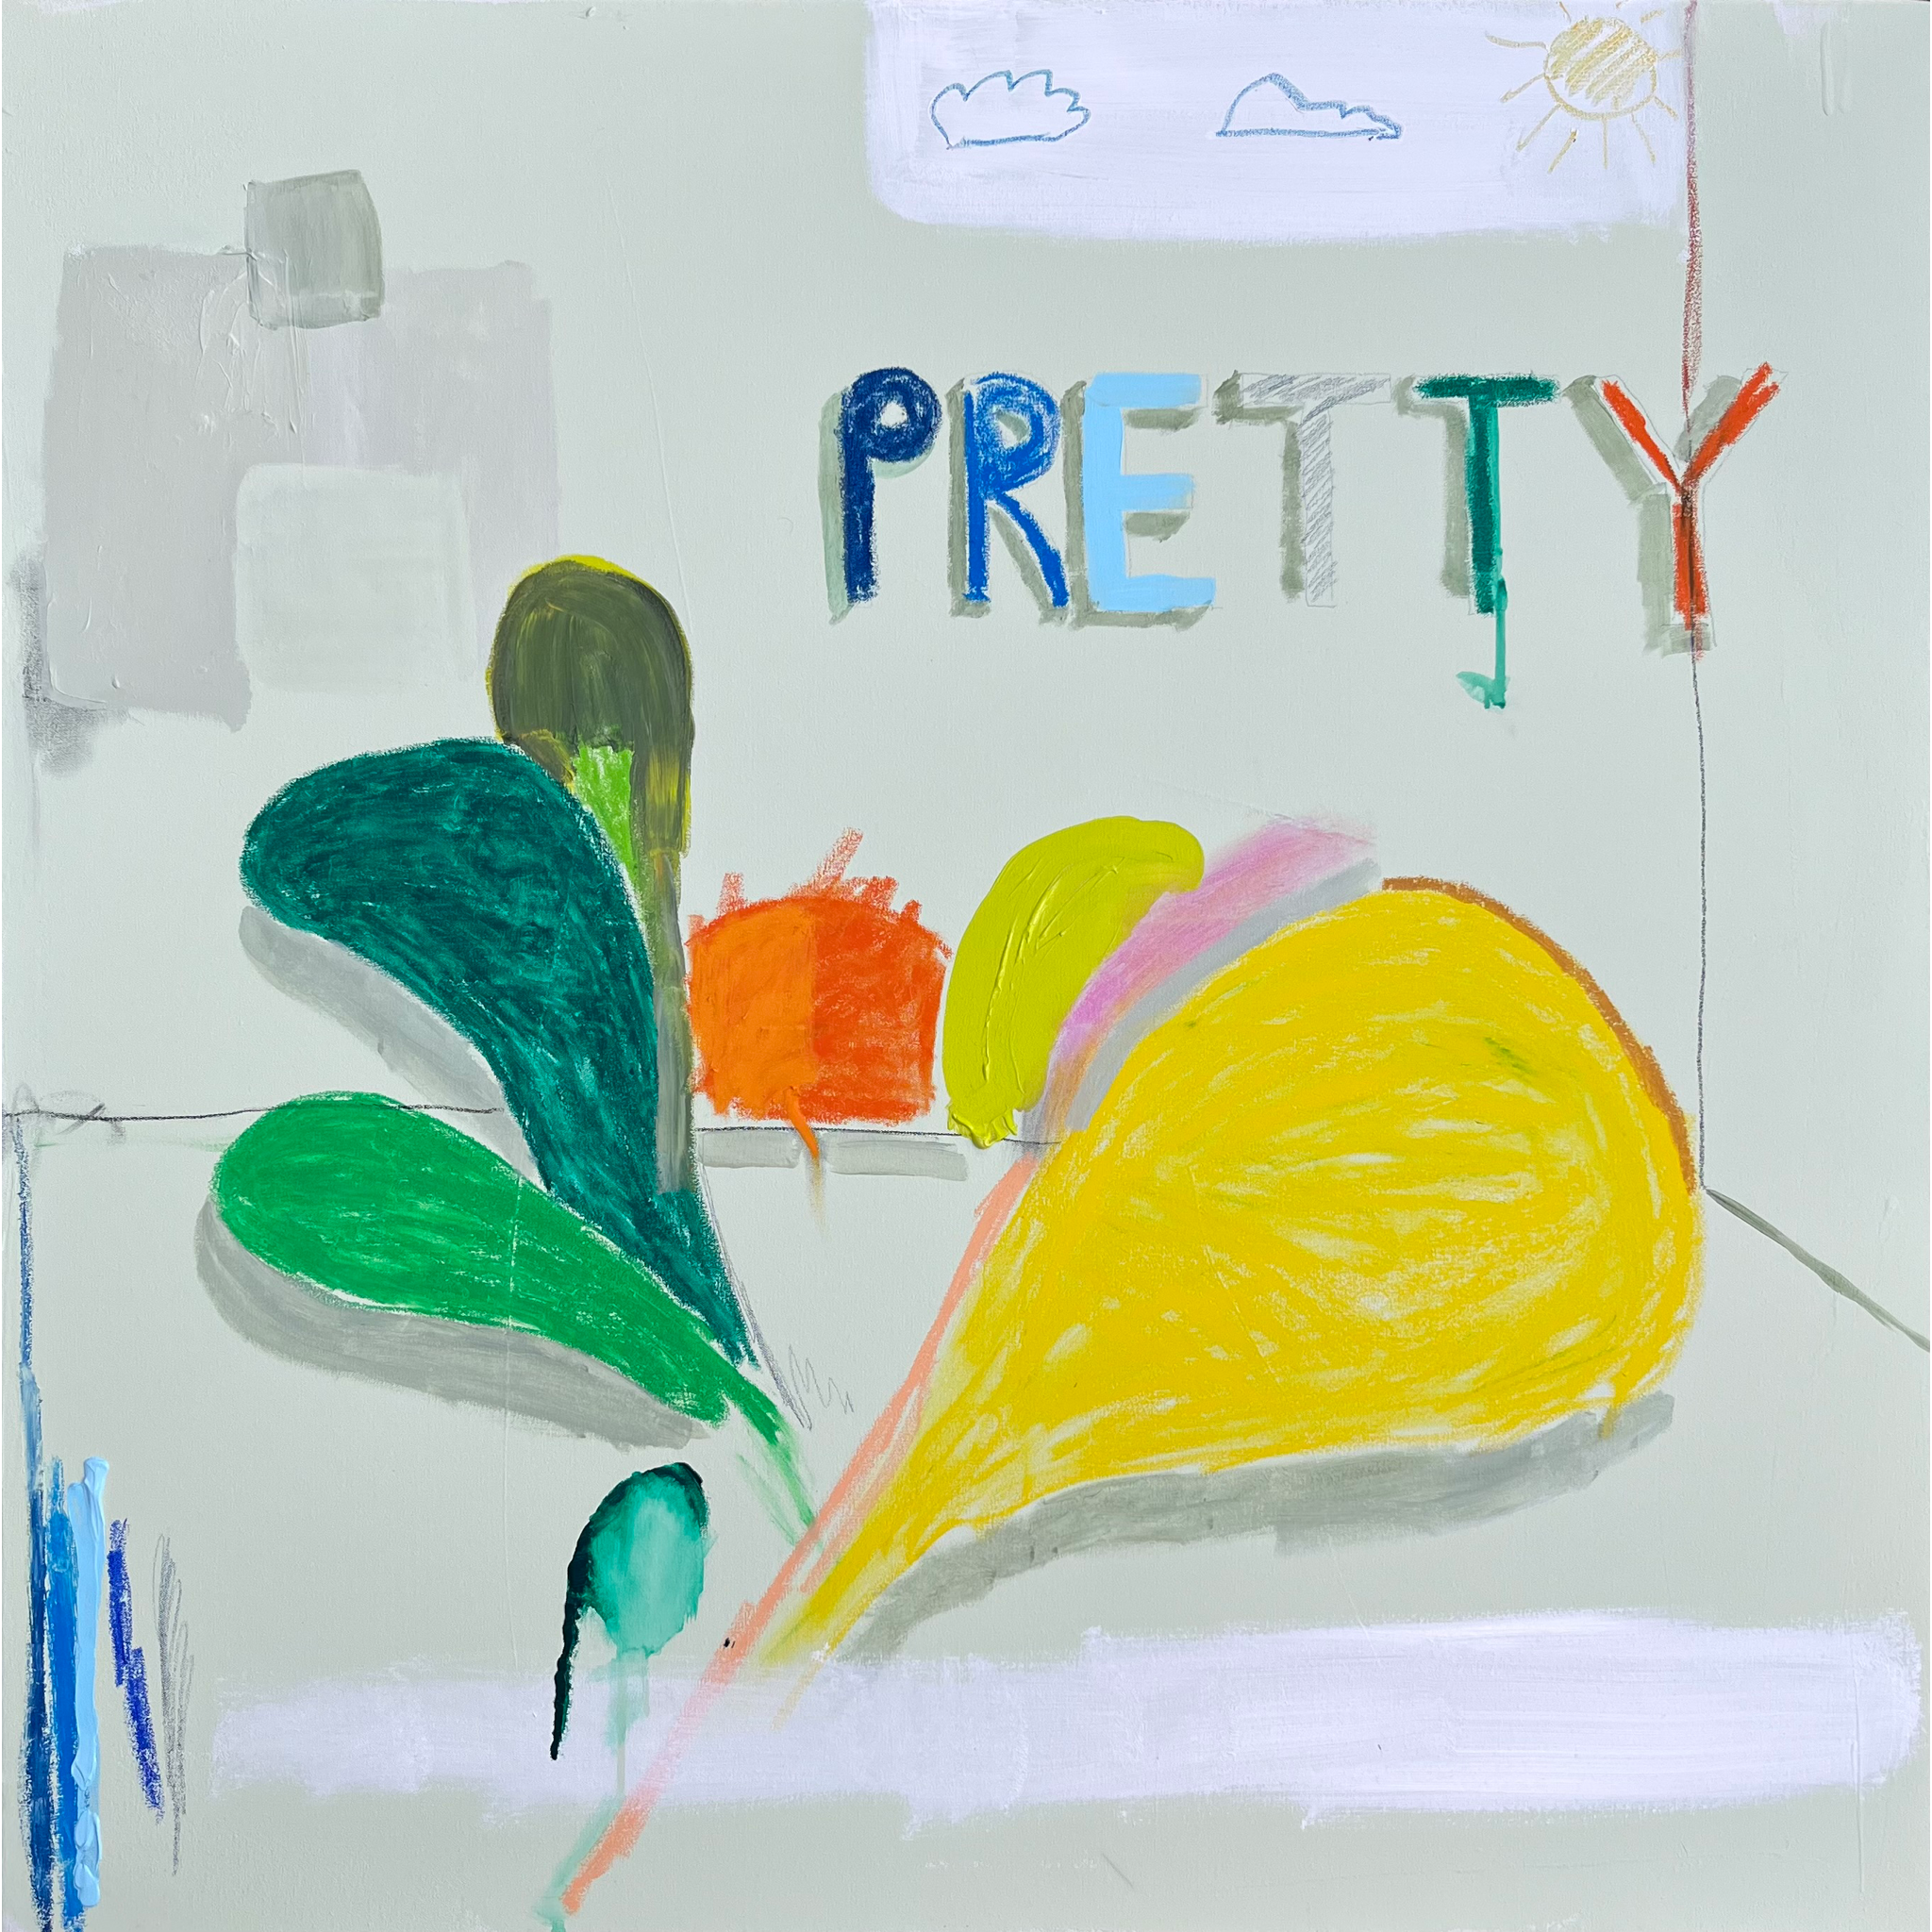 Featured image for “Pretty”